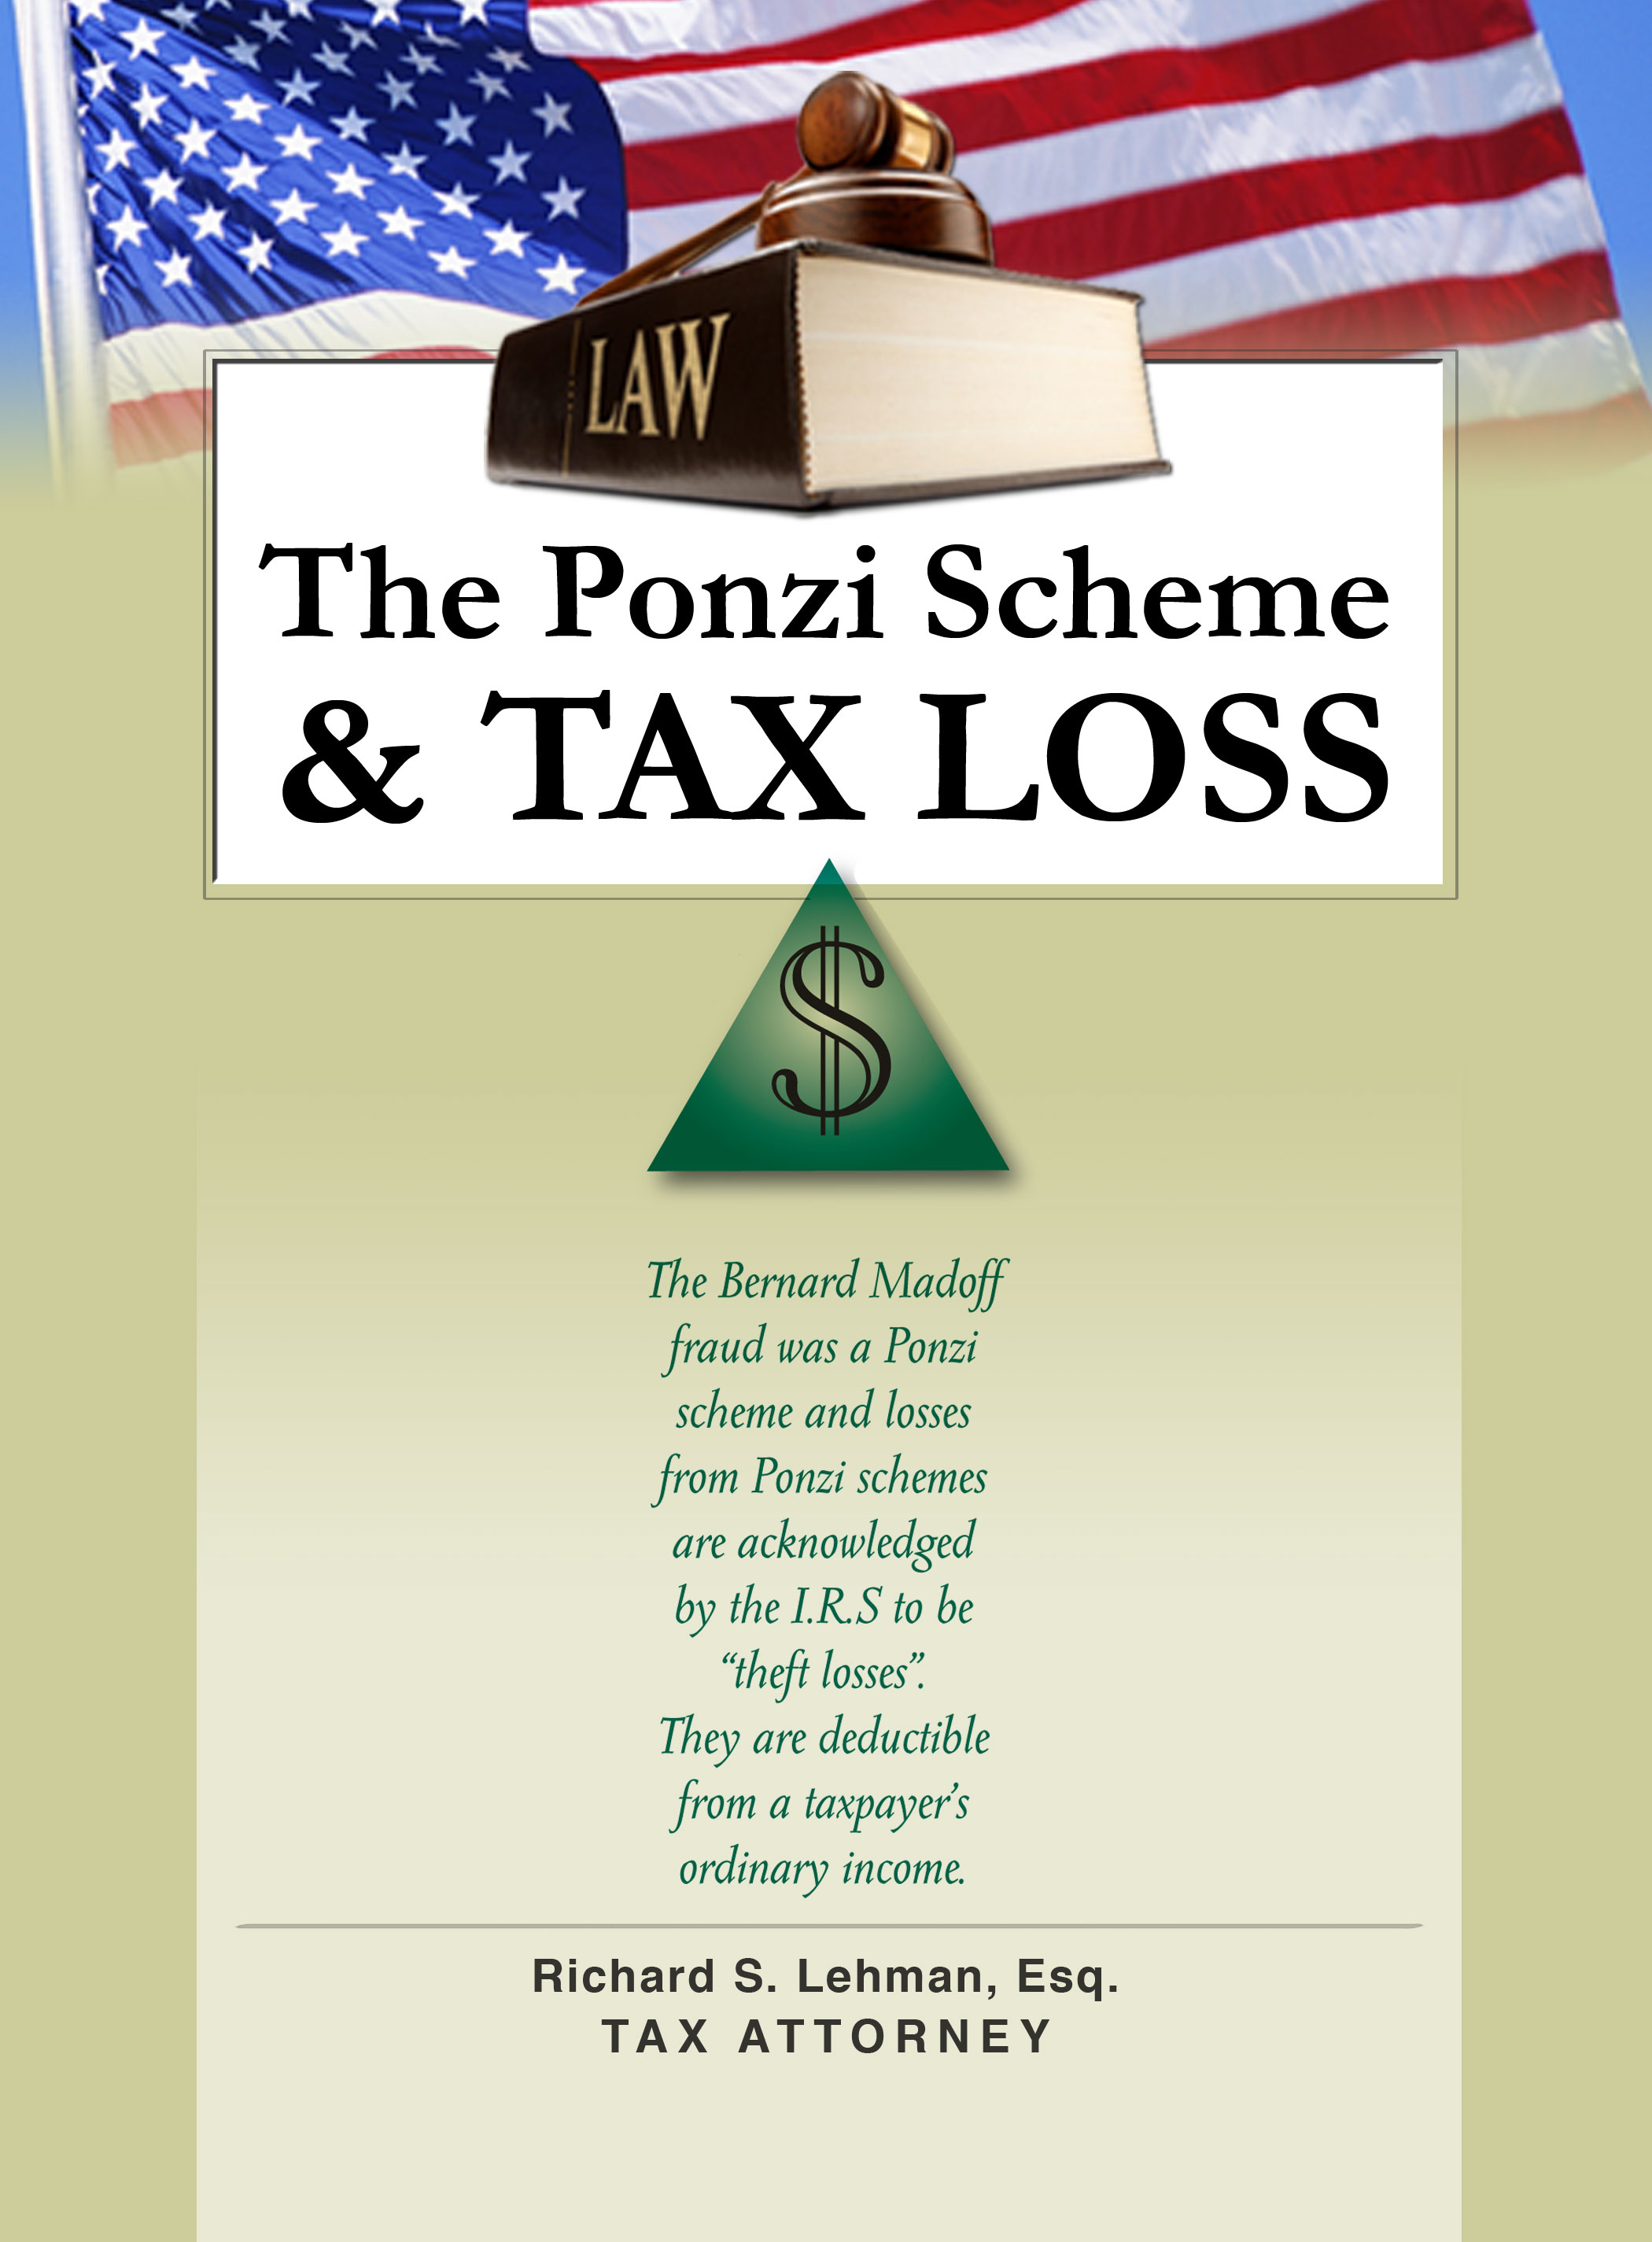 The FTX fraud was a Ponzi scheme - and losses are deductible from a taxpayer’s ordinary income